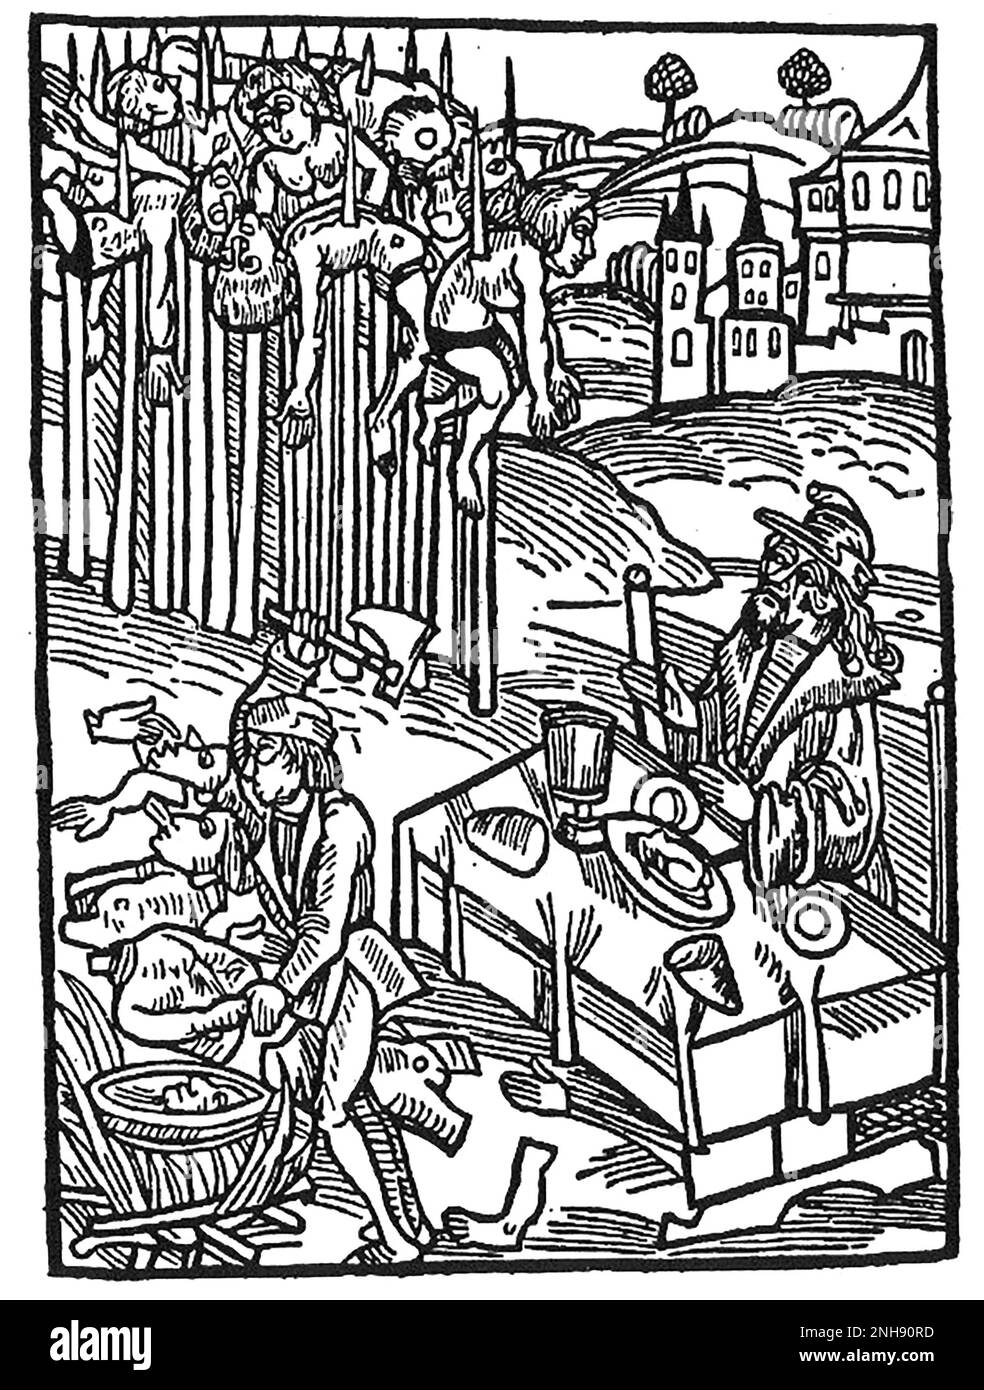 Vlad III dining among the impaled corpses of his victims. Engraving from 1500. Vlad III, commonly known as Vlad the Impaler or Vlad Dracula (1428/31 ,Ai 1476/77), was Voivode of Wallachia three times. He is often considered one of the most important rulers in Wallachian history and a national hero of Romania. Notorious for his cruelty, his patronymic inspired the name of Bram Stoker's literary vampire, Count Dracula. Stock Photo